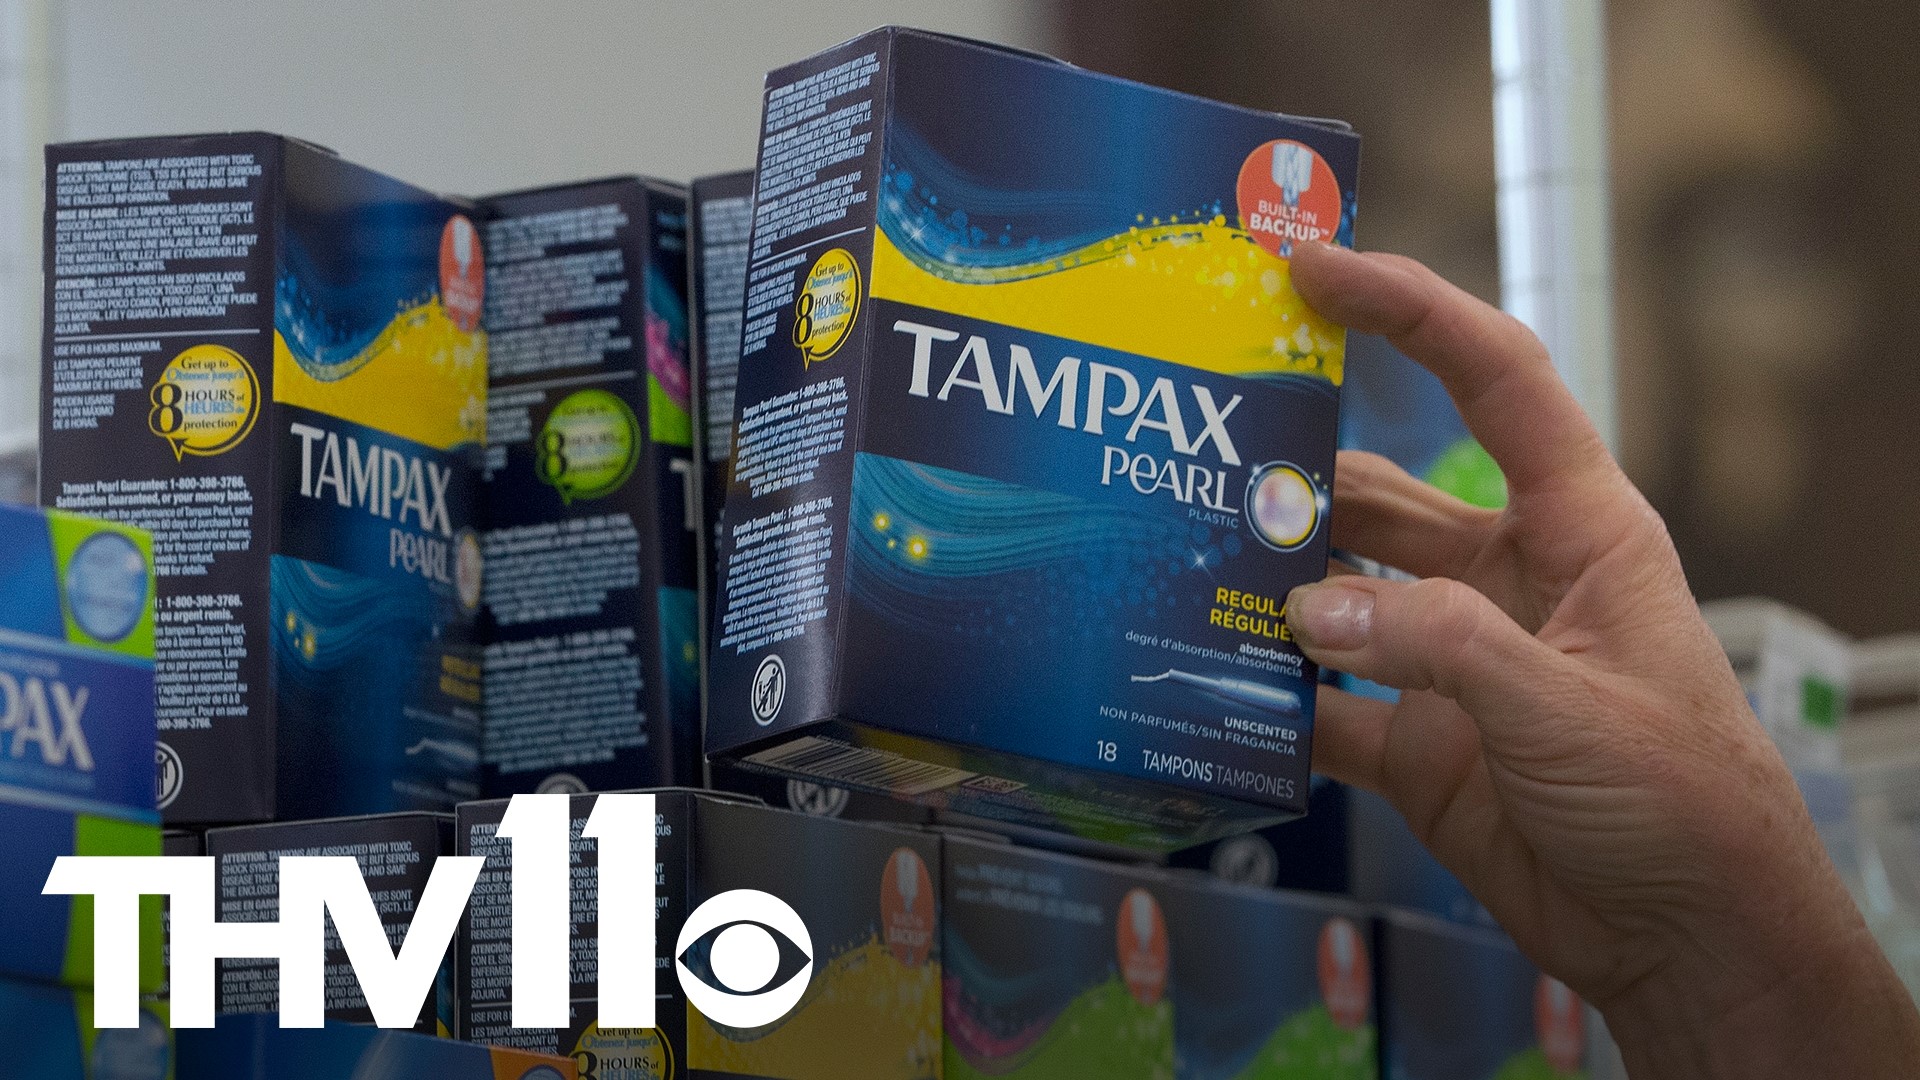 Arkansas Period Poverty Project filed a ballot initiative to remove sales tax from feminine hygiene products.